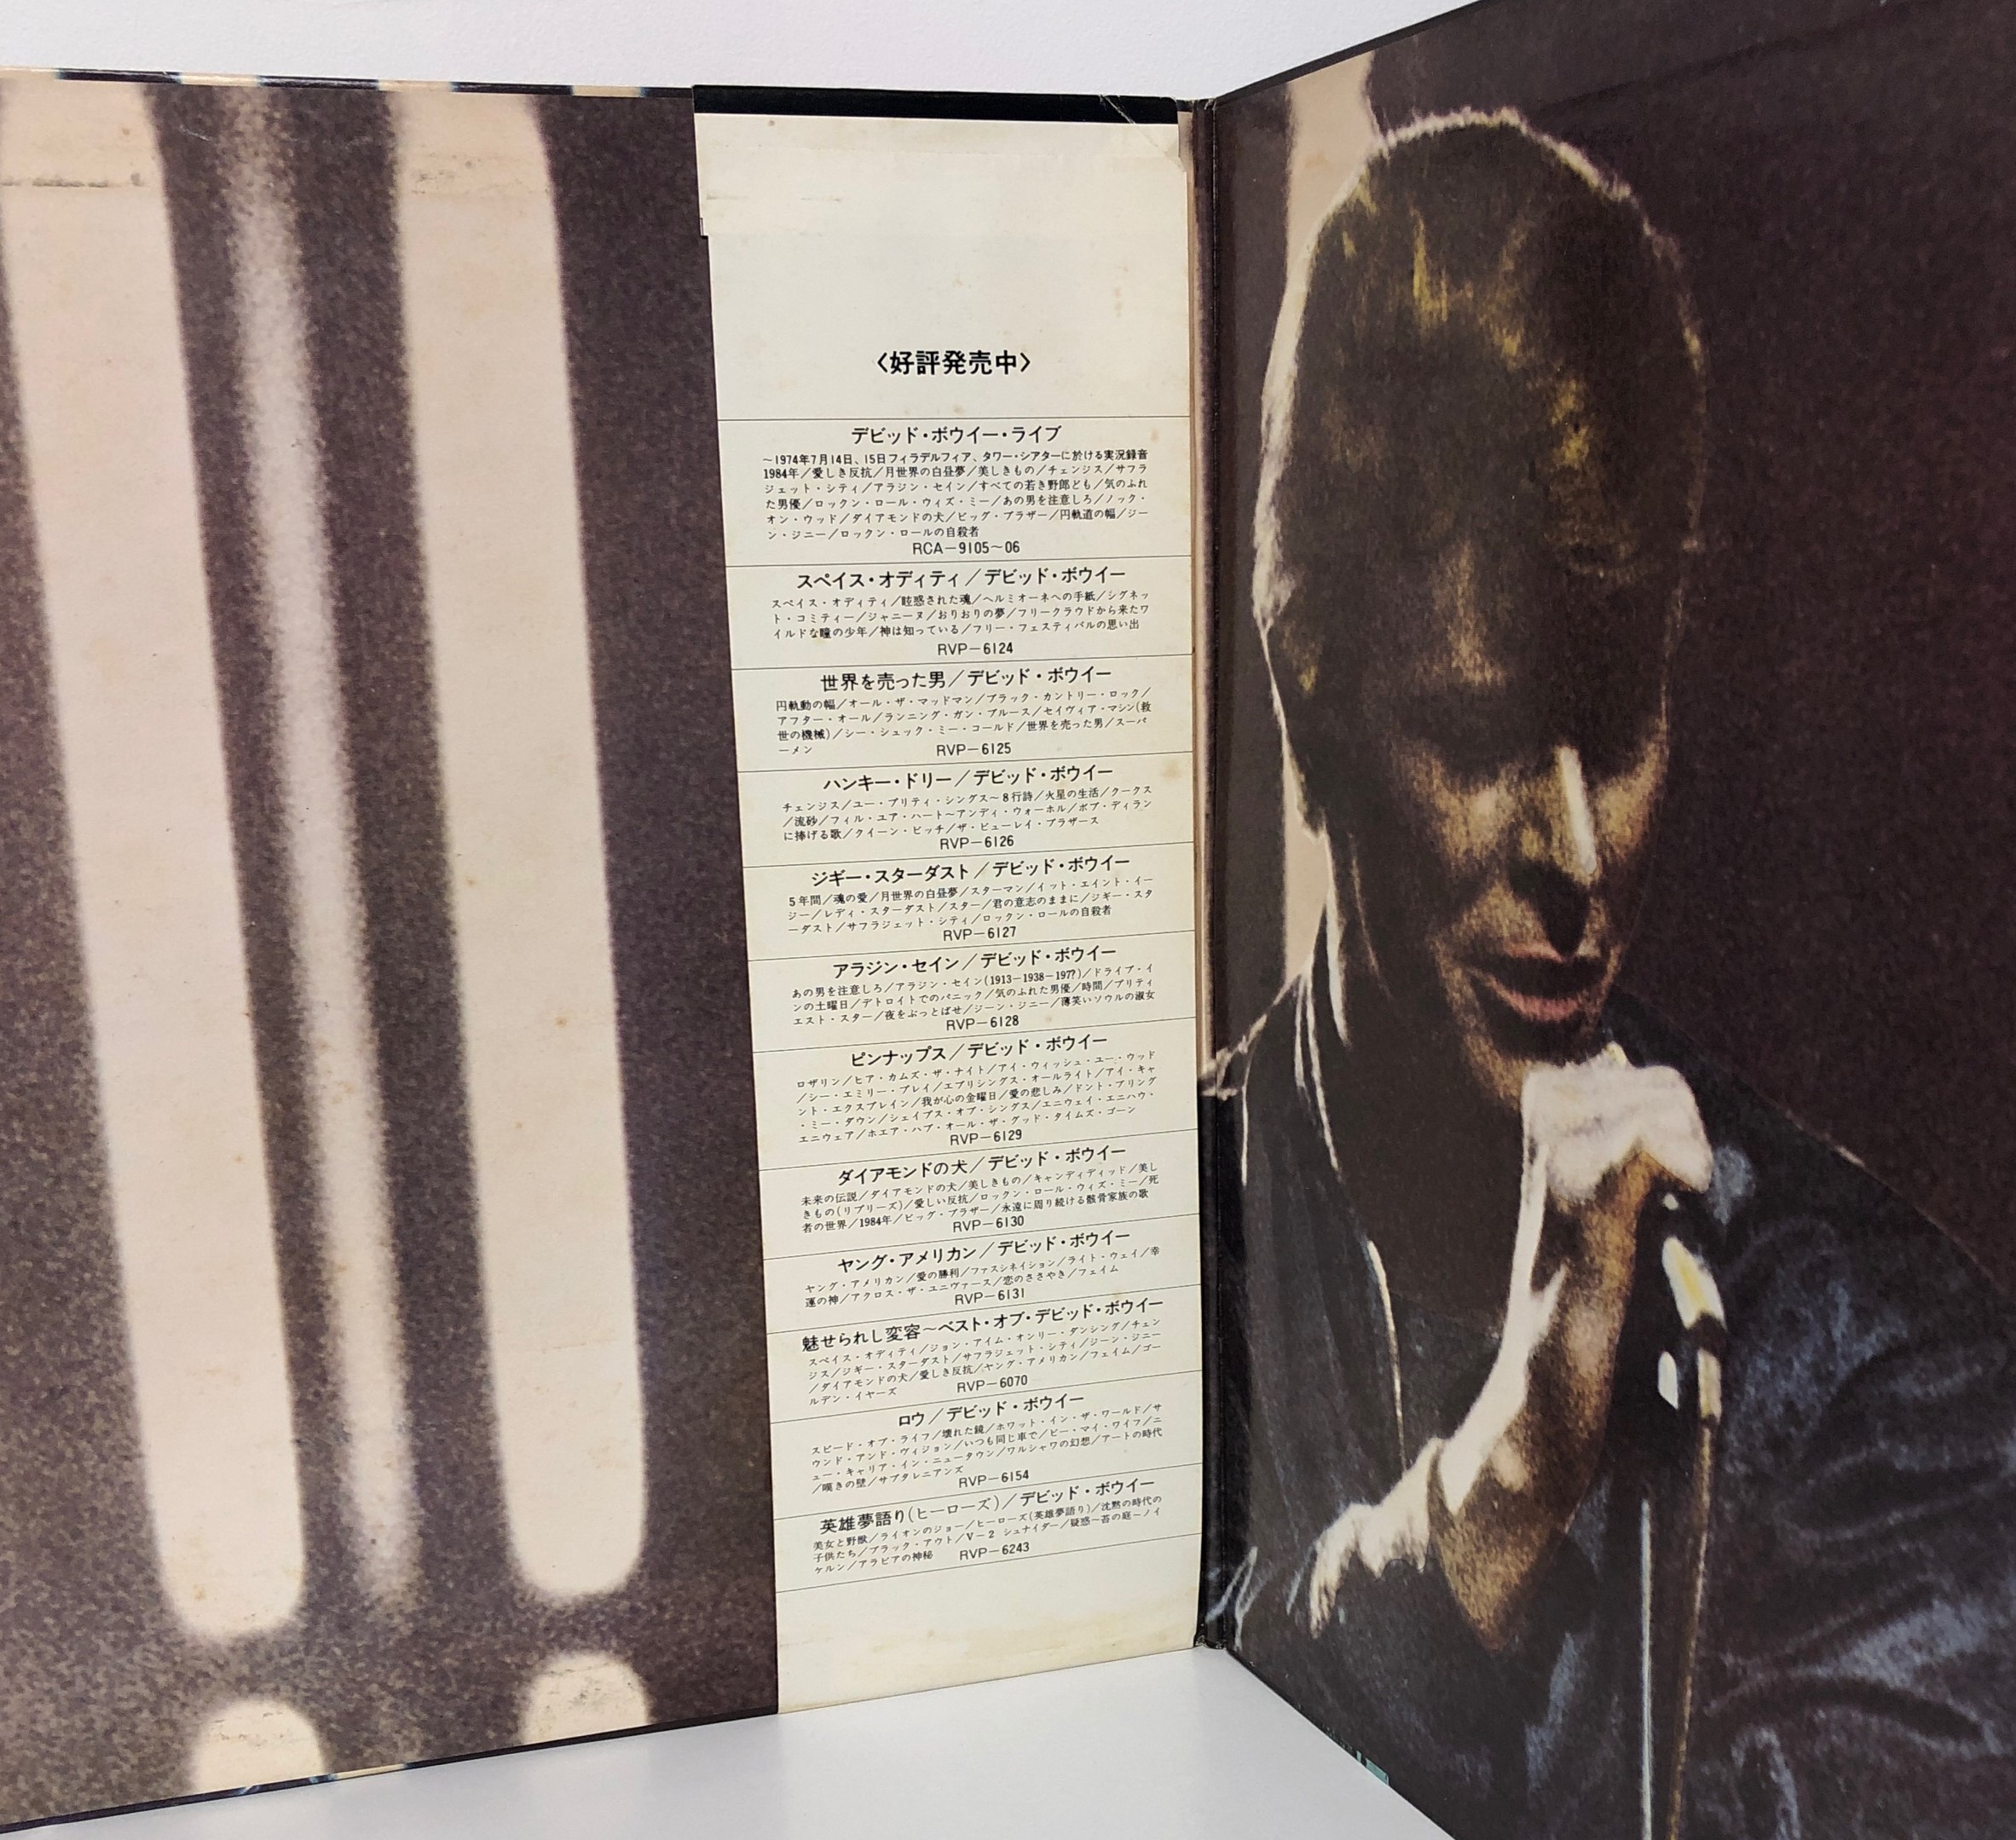 David Bowie / Stage （デヴィッド・ボウイ／ステージ） | 中古